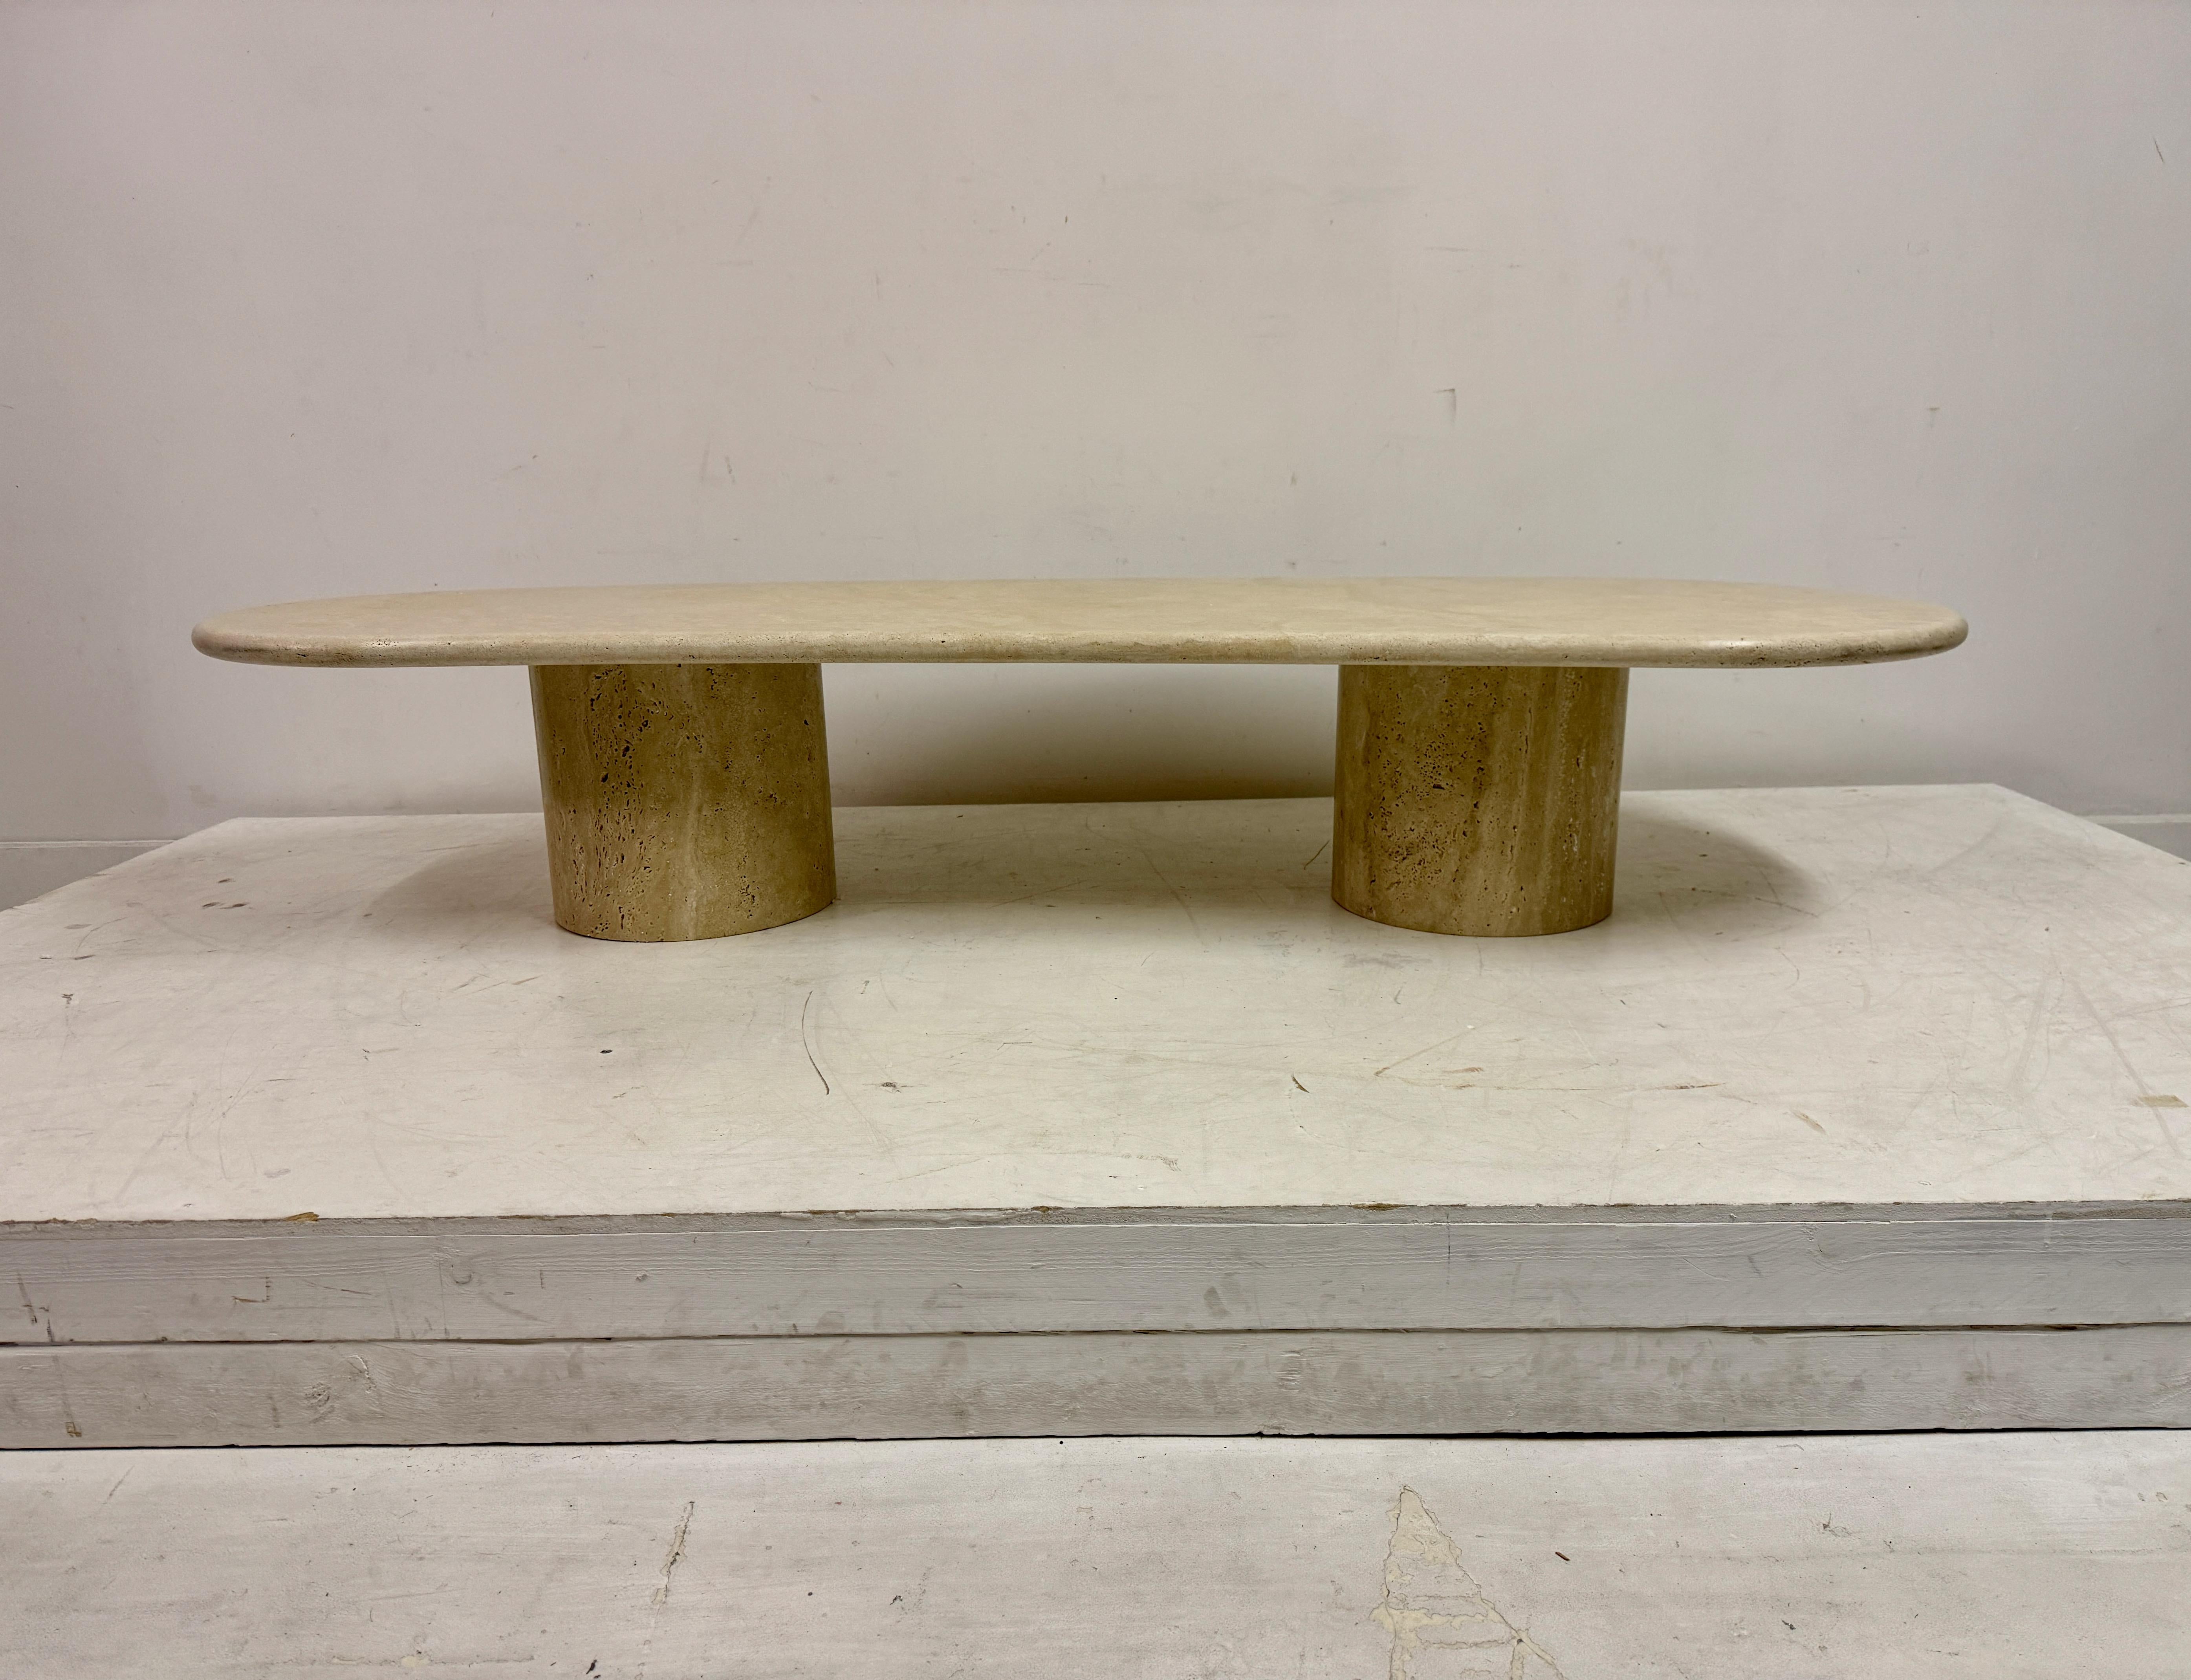 Coffee table

Travertine

Organically shape

Two cylindrical pedestals

Made in Italy

If not in stock, then a 4/5 week lead time.